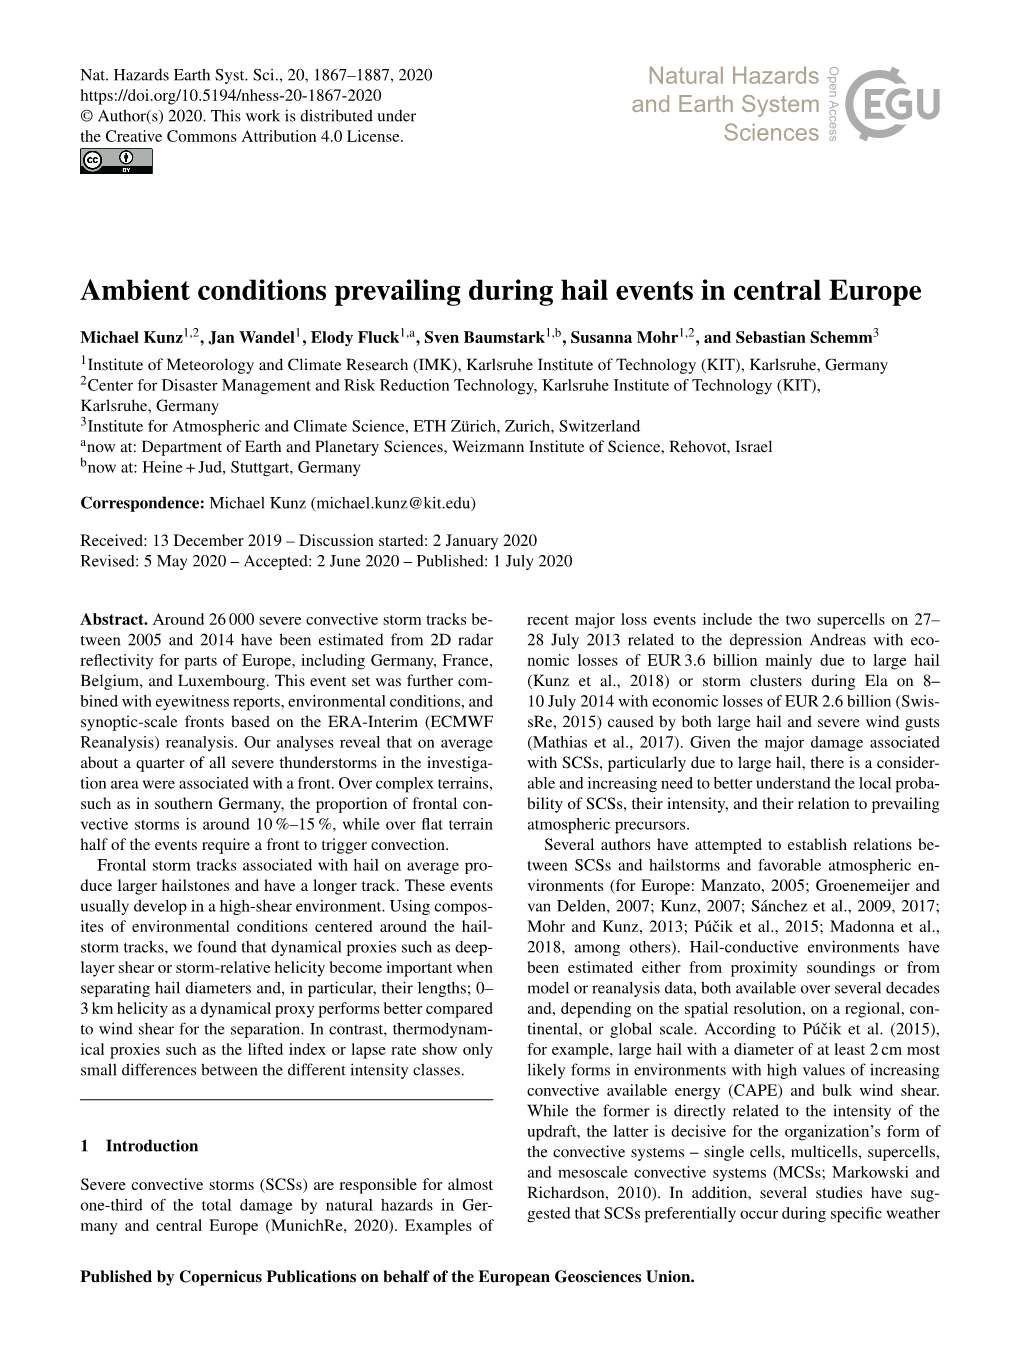 Ambient Conditions Prevailing During Hail Events in Central Europe